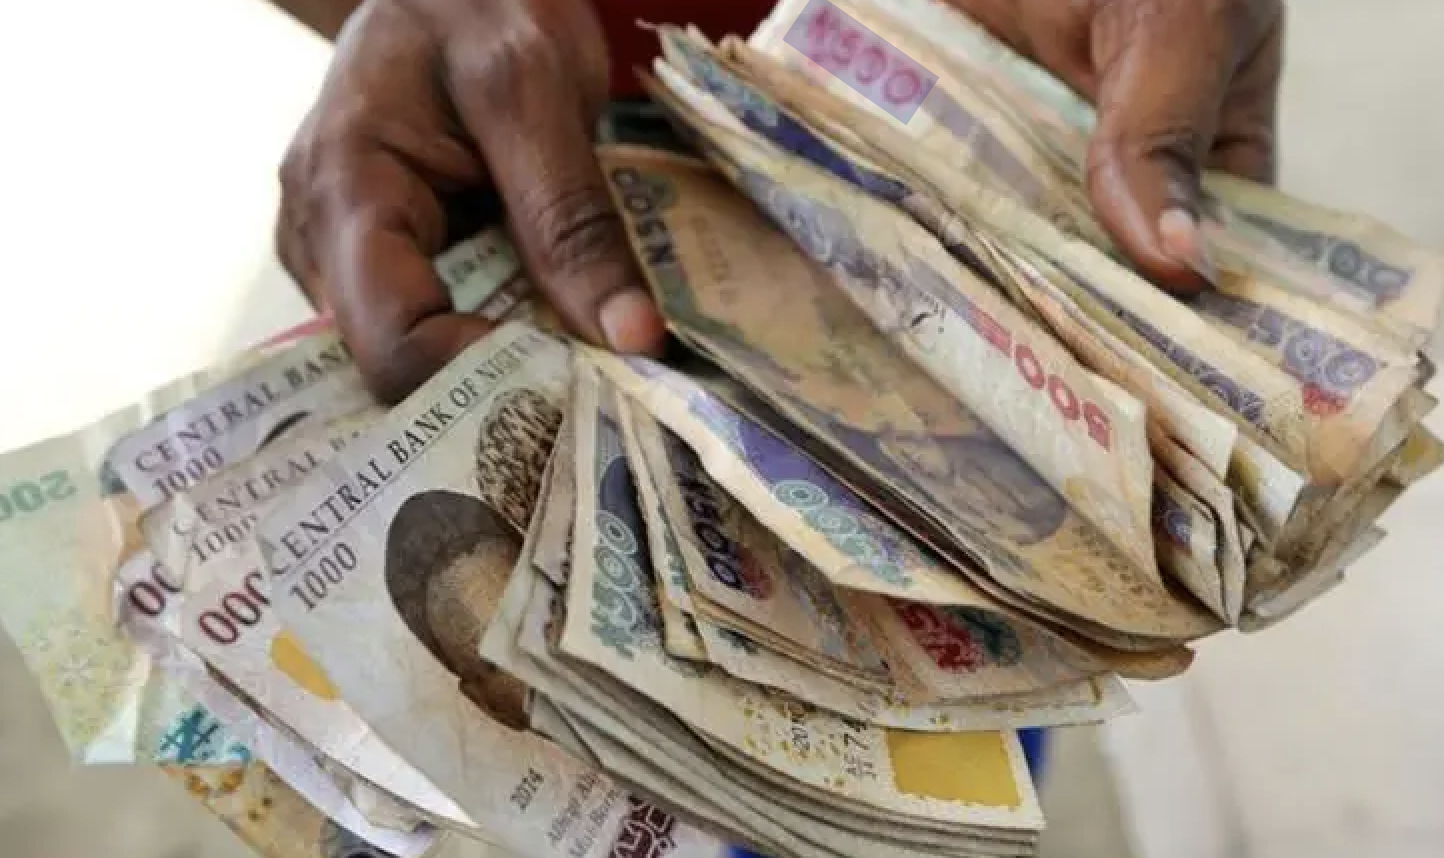 The Nigerian currency in circulation fell in July for the first time since the Naira swap crises